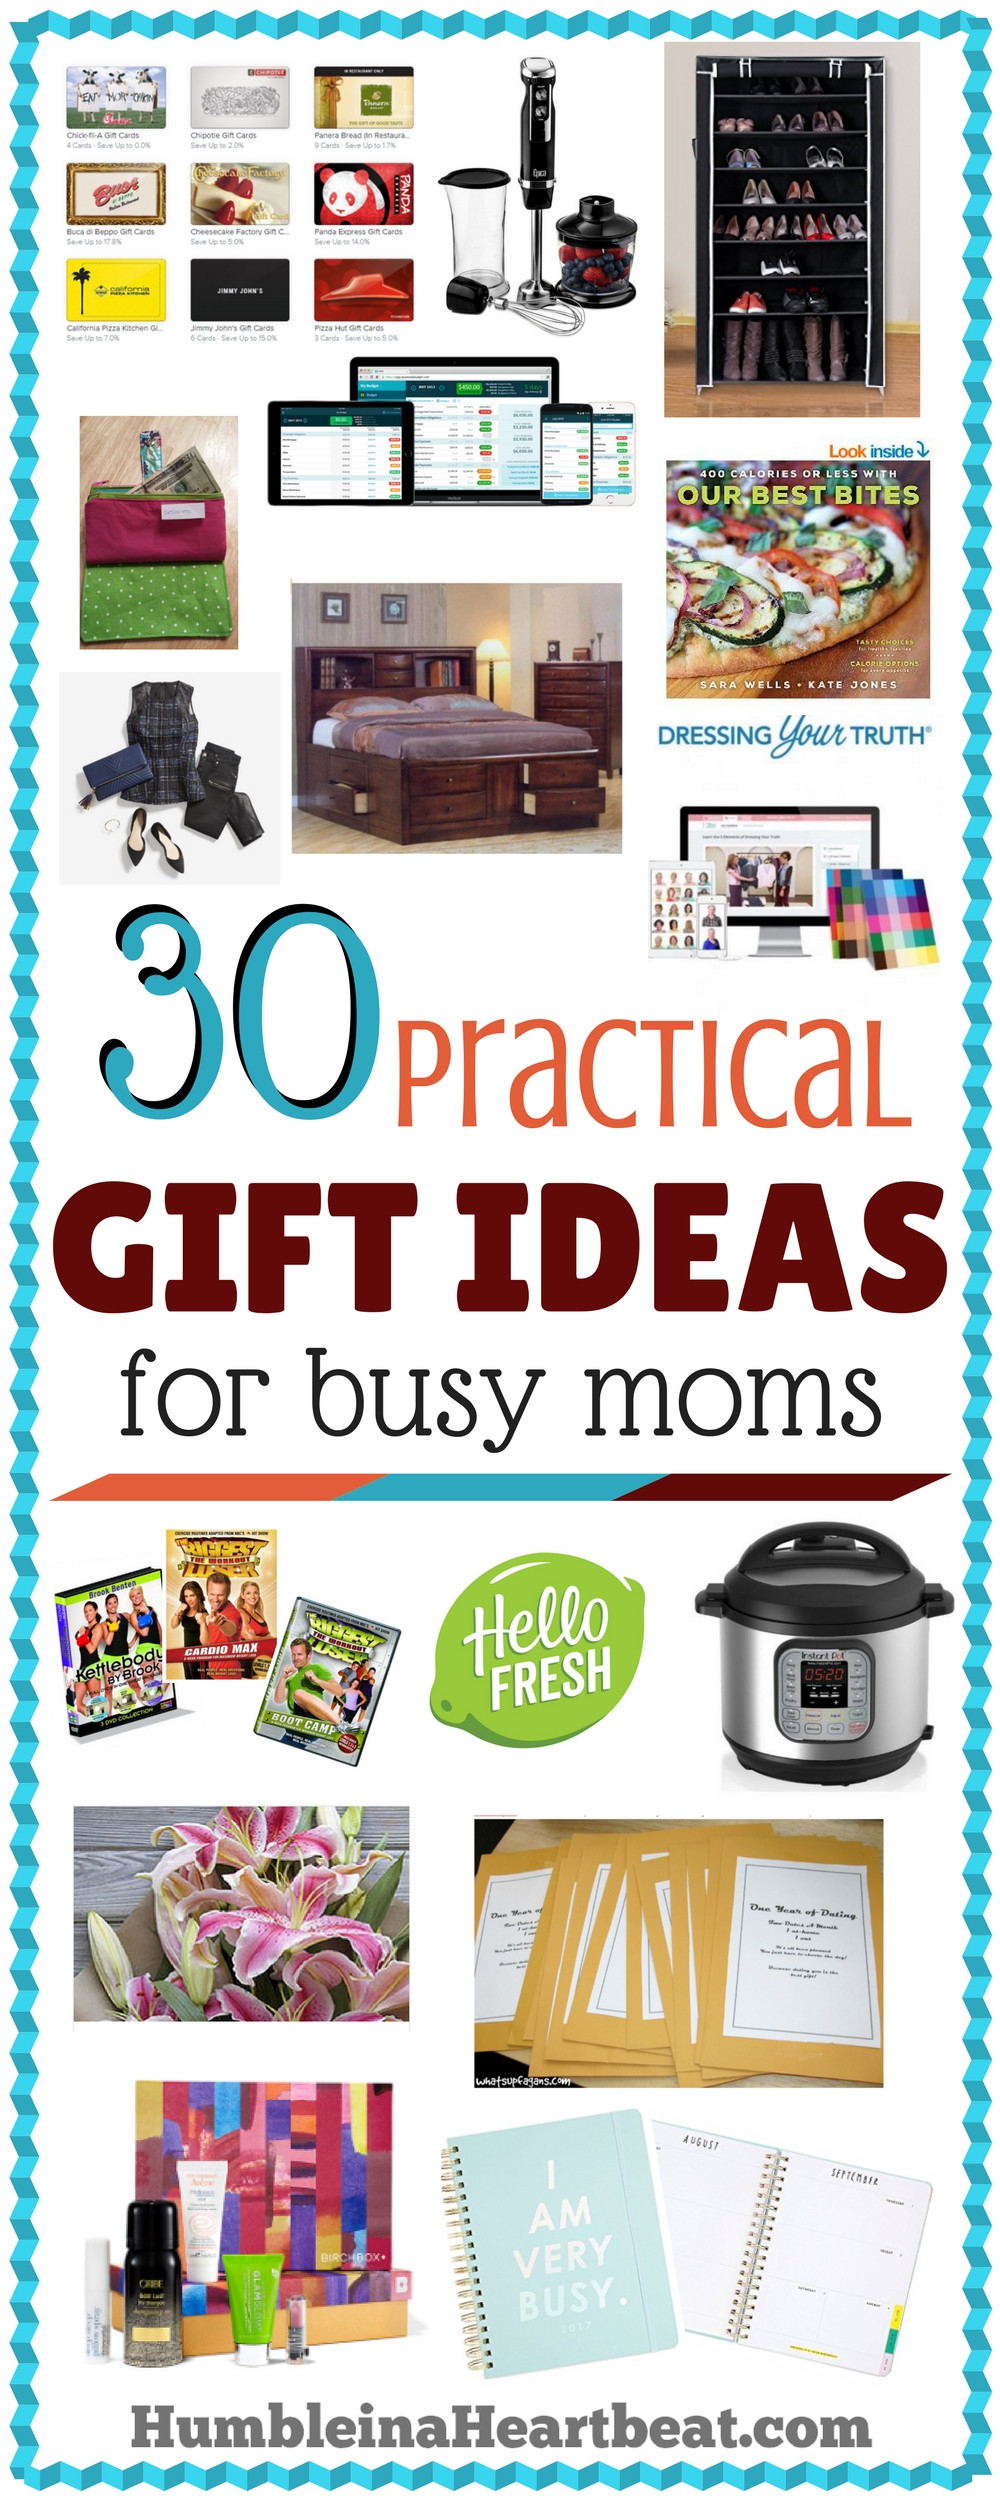 Practical Mother'S Day Gift Ideas
 The Ultimate Gift Guide for Practical Busy Moms